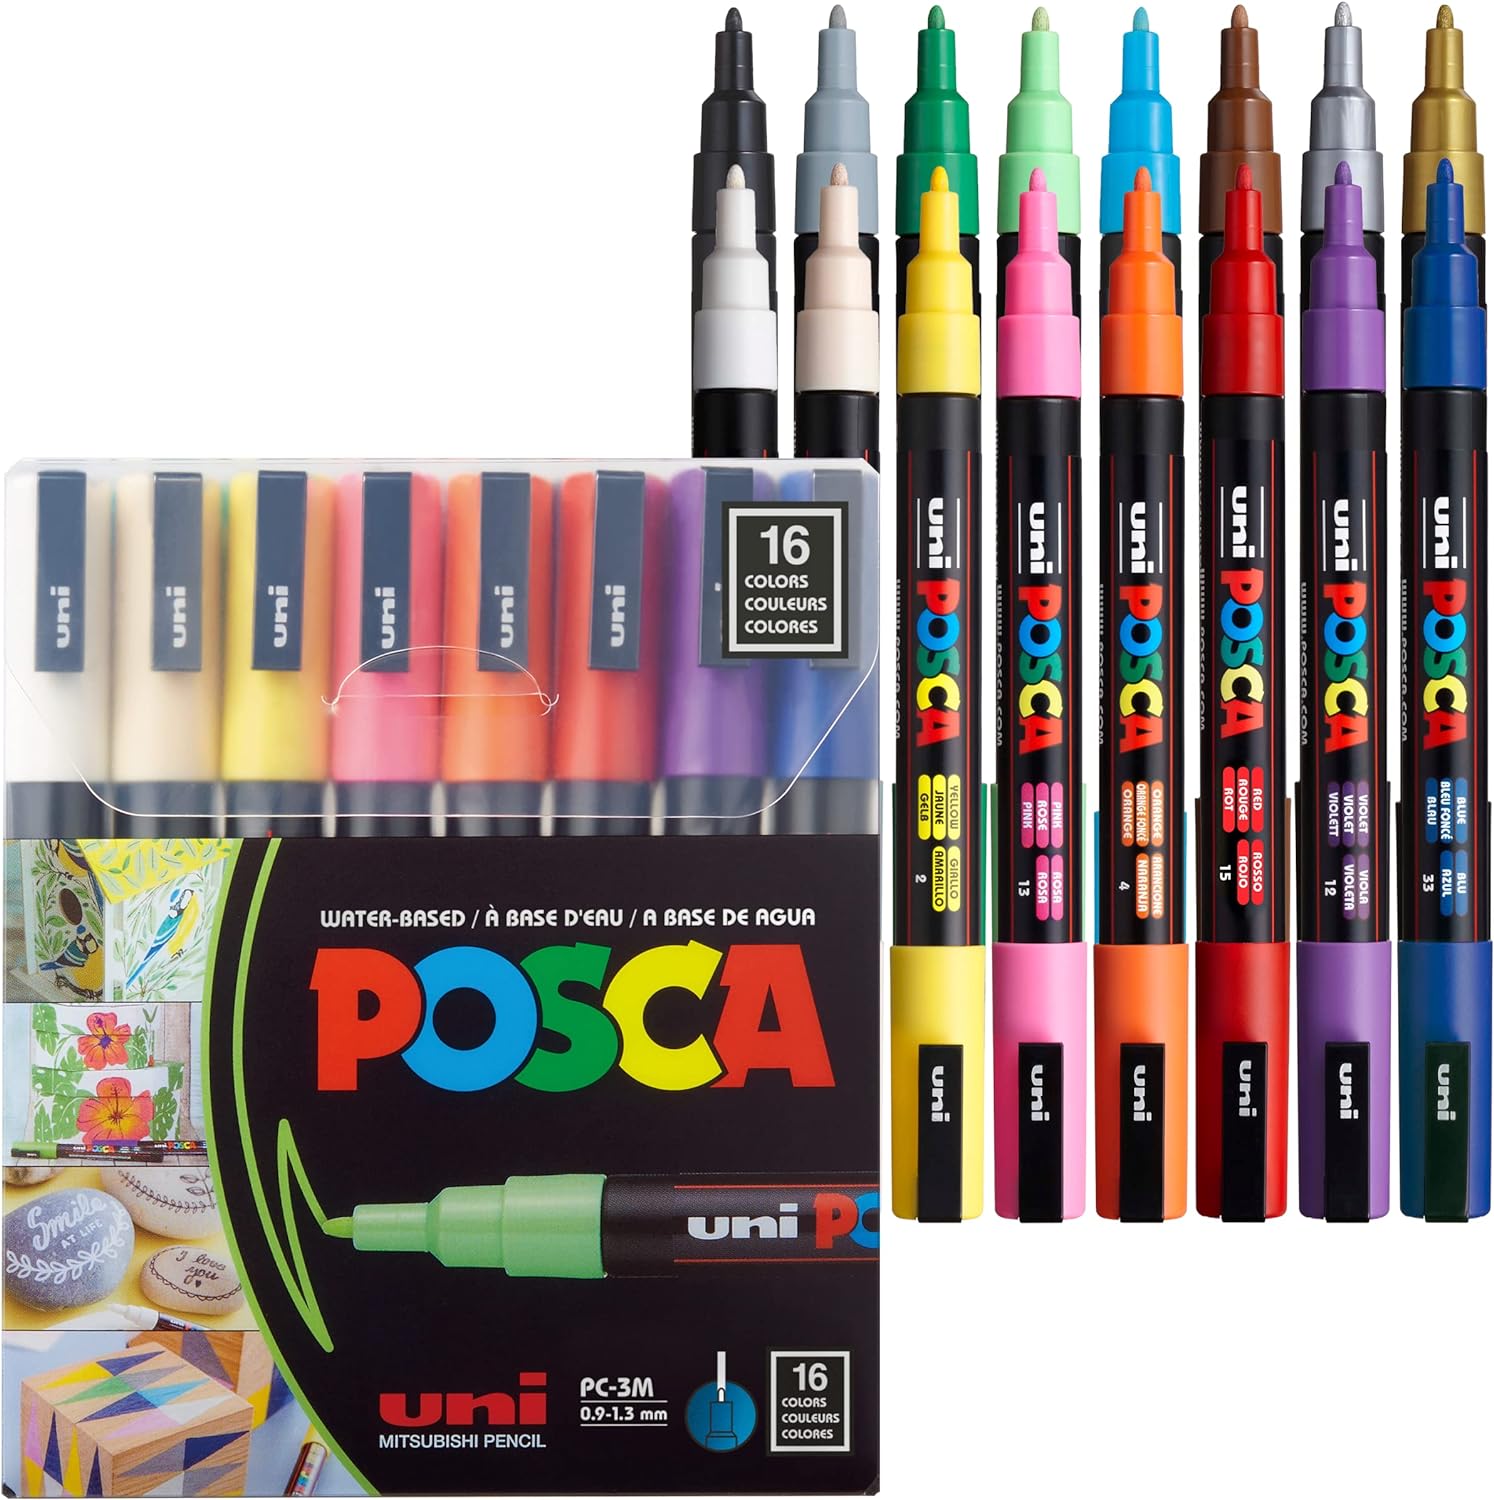 16 Posca Paint Markers, 3M Fin…